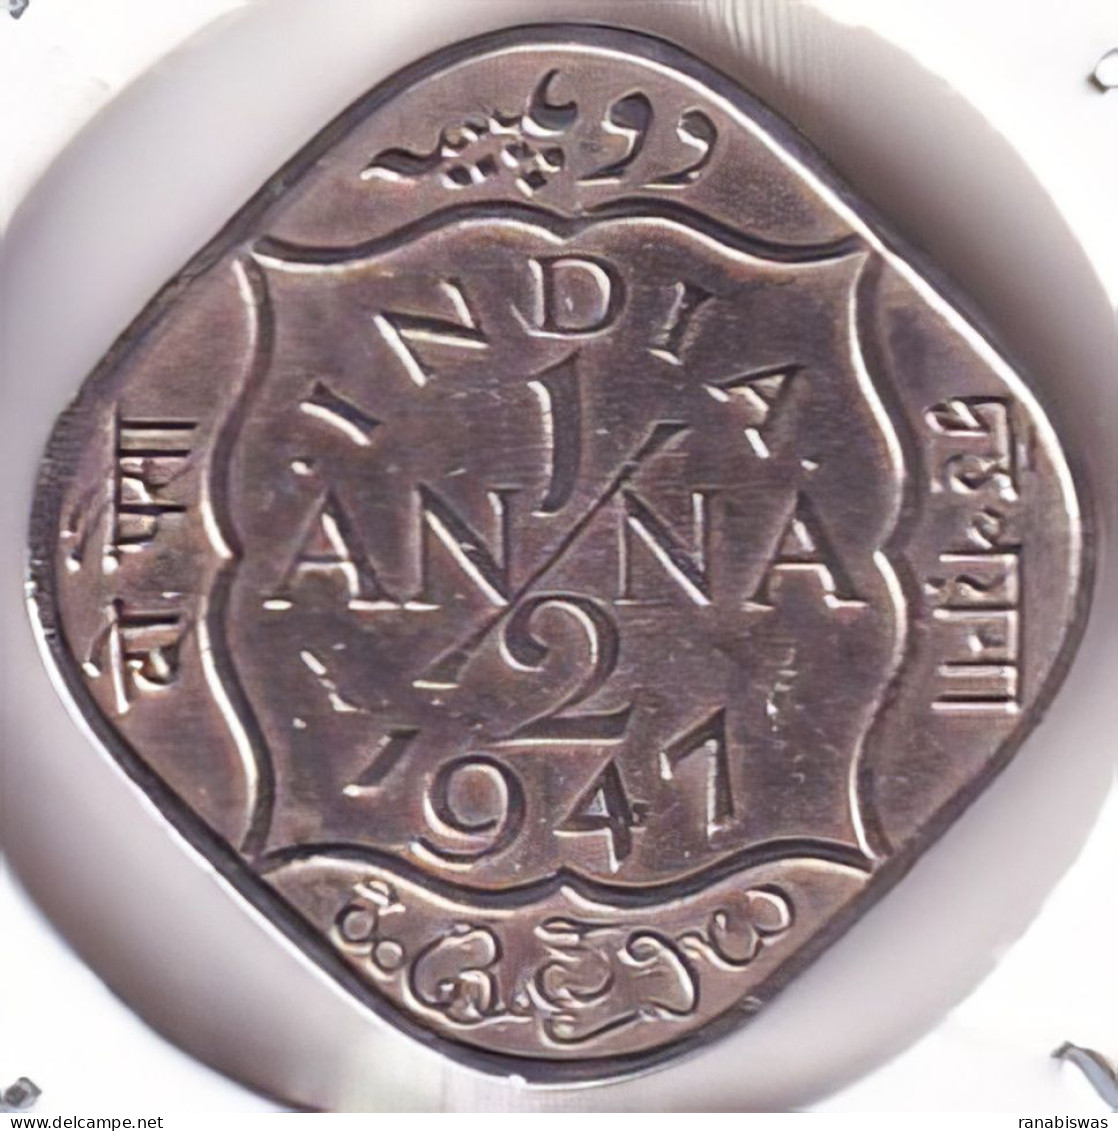 INDIA COIN LOT 170, 1/2 ANNA 1947, BOMBAY MINT, UNC, RARE - Indien